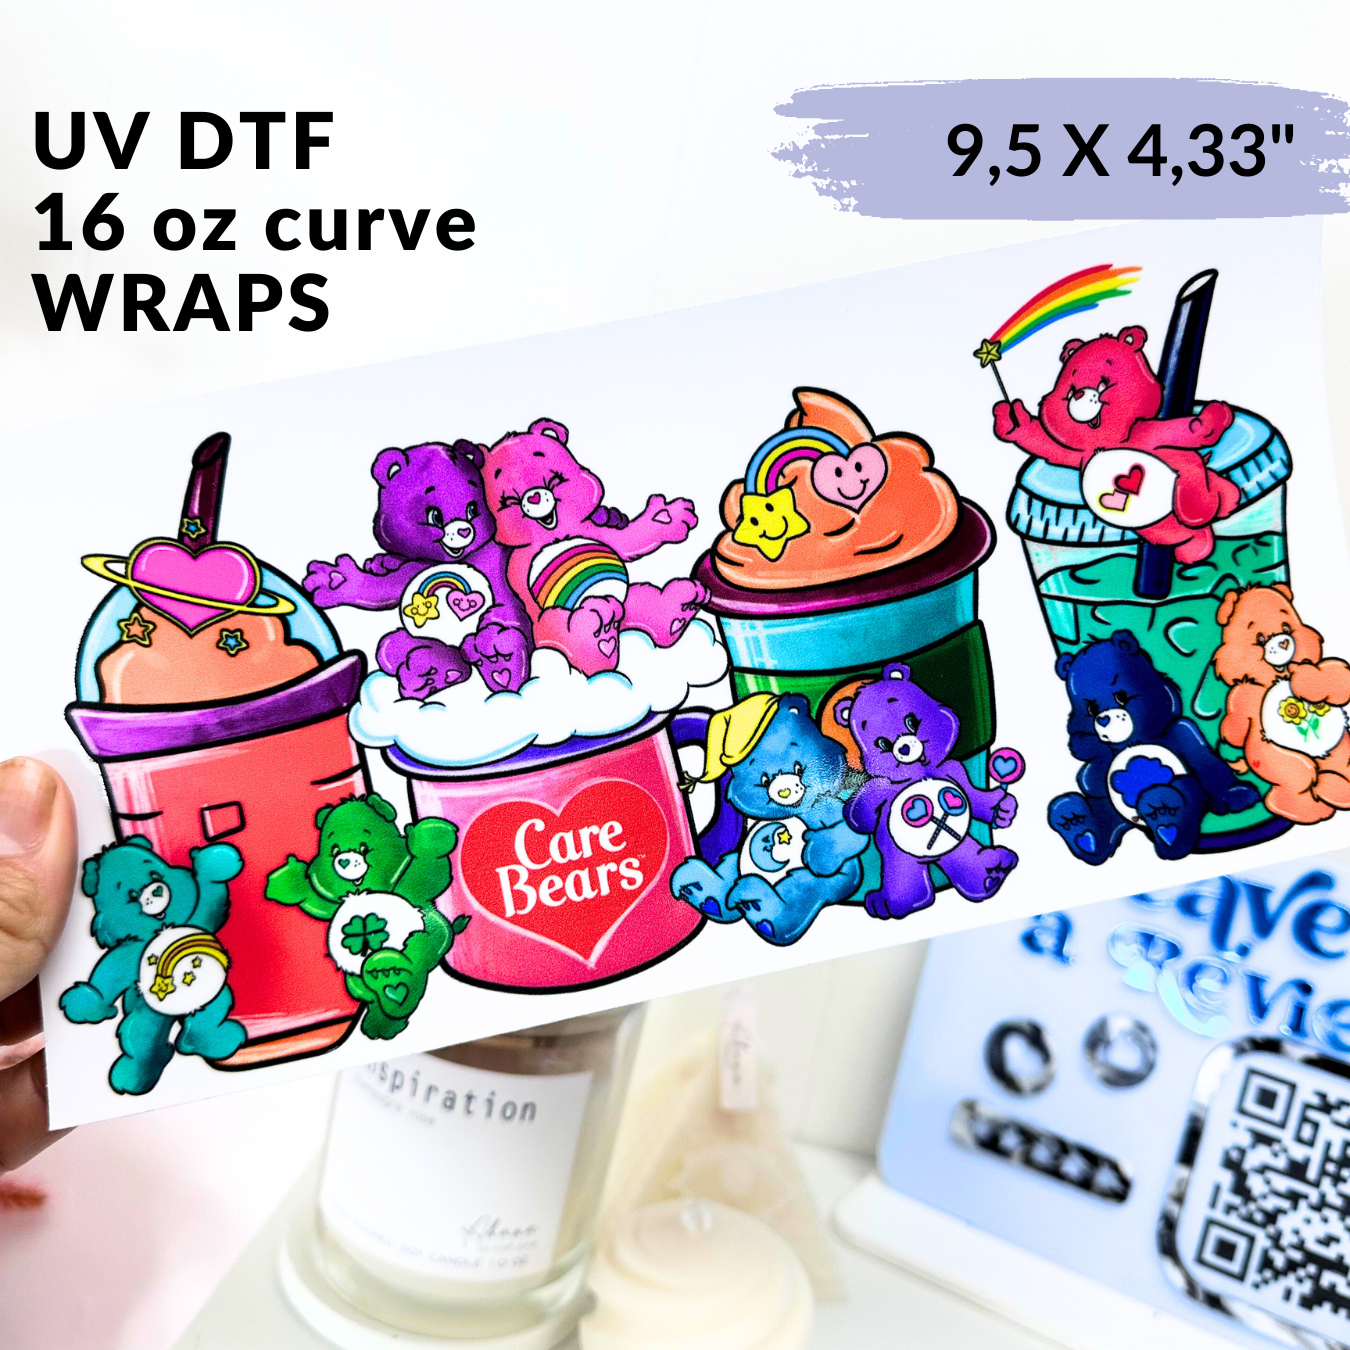 UV DTF - Color Bears Libbey cup Wrap